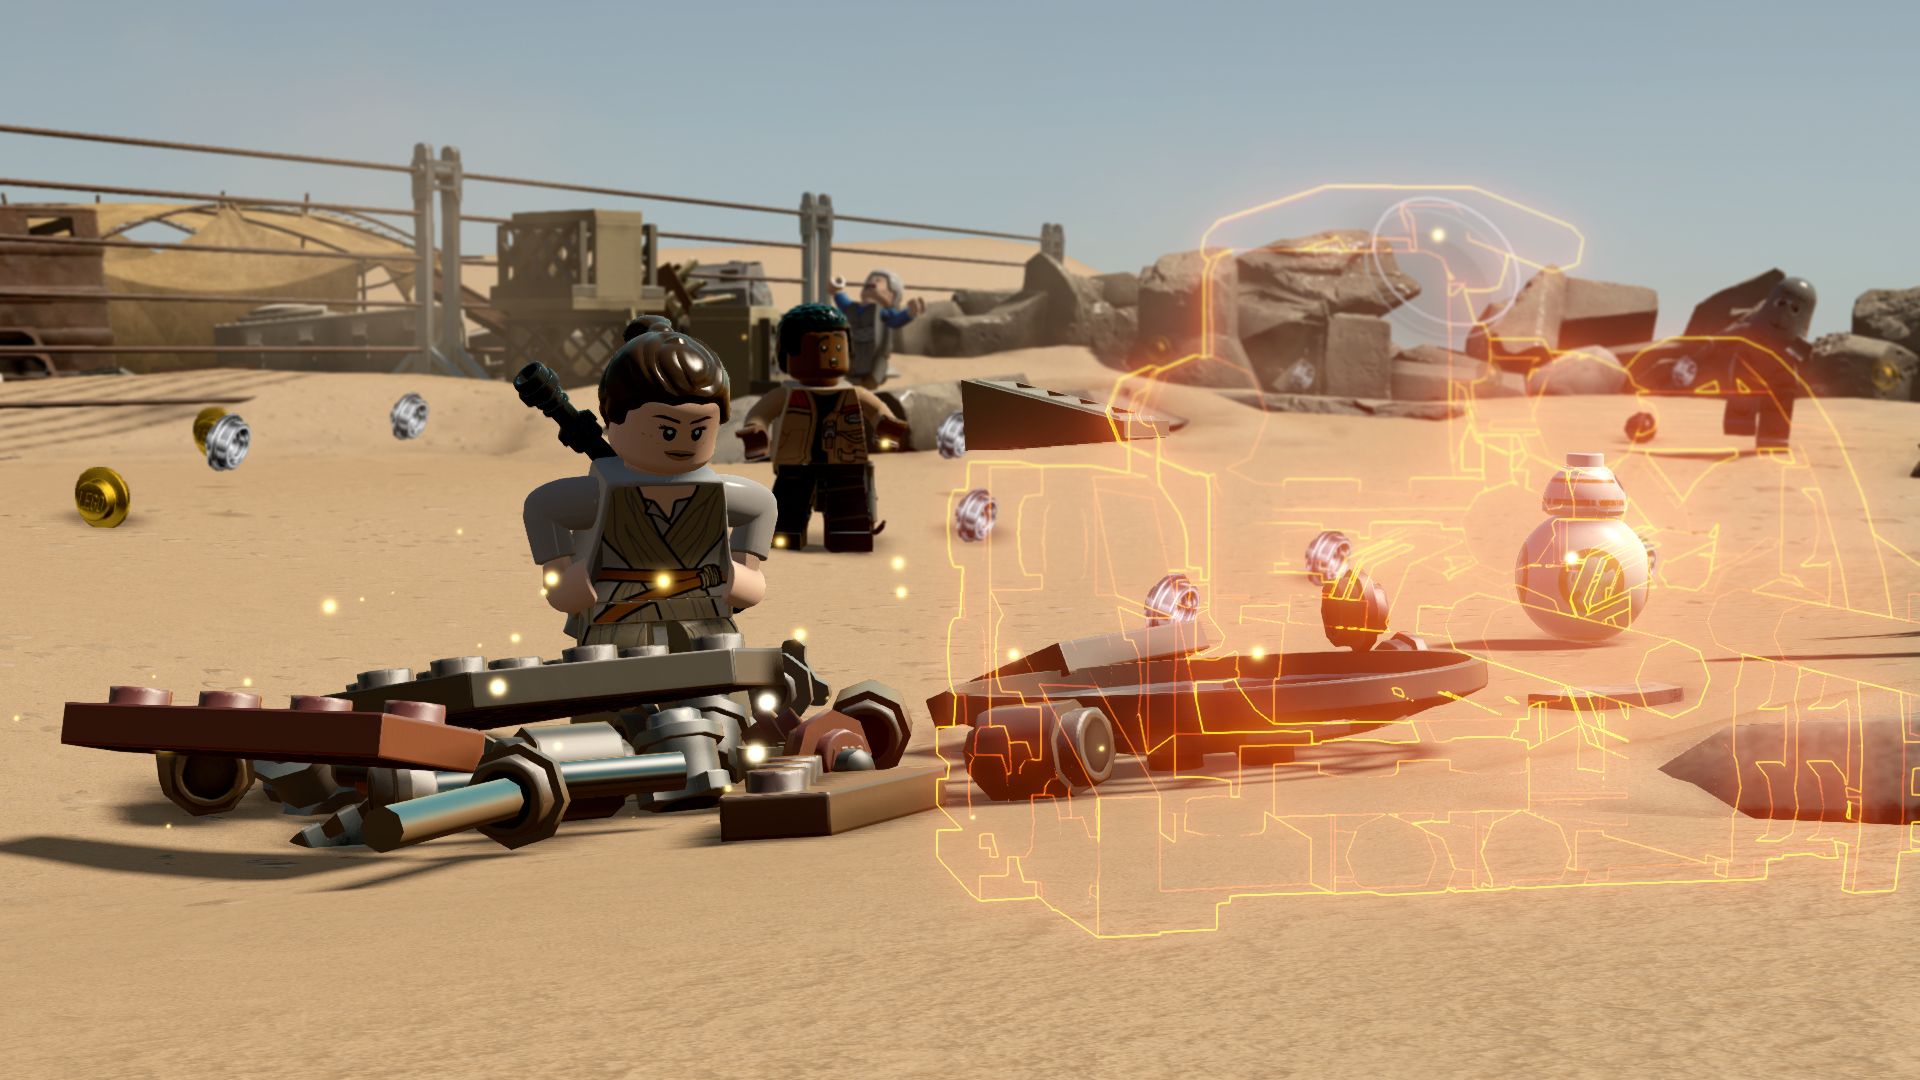 Video Game LEGO Star Wars: The Force Awakens HD Wallpaper | Background Image